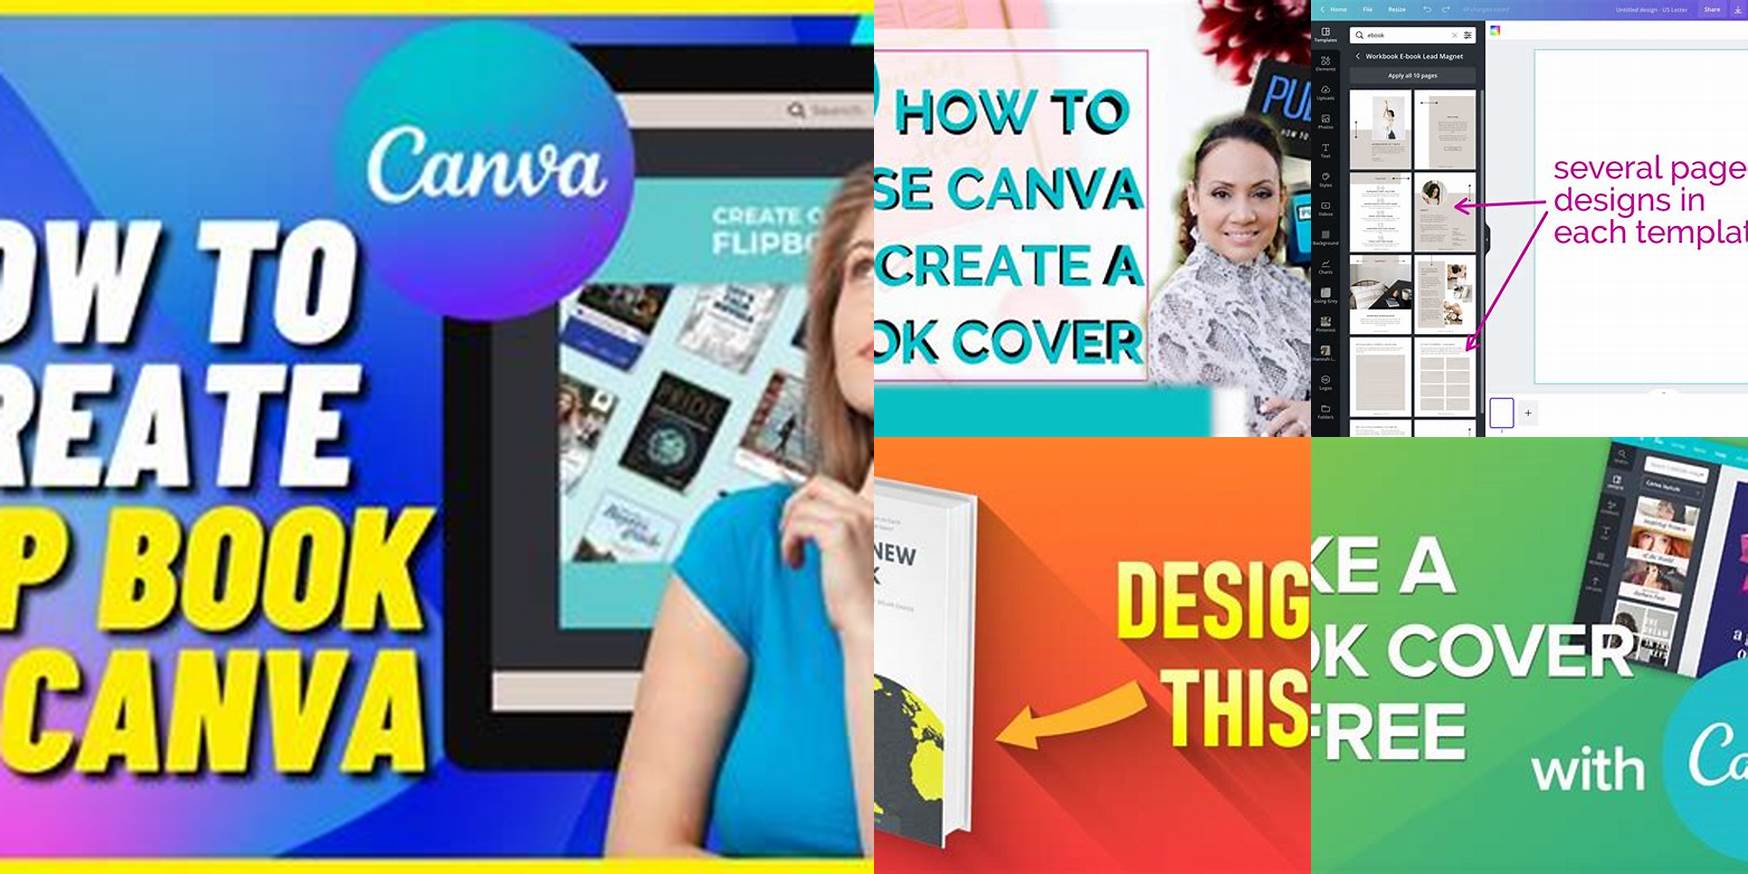 How To Make A Book On Canva